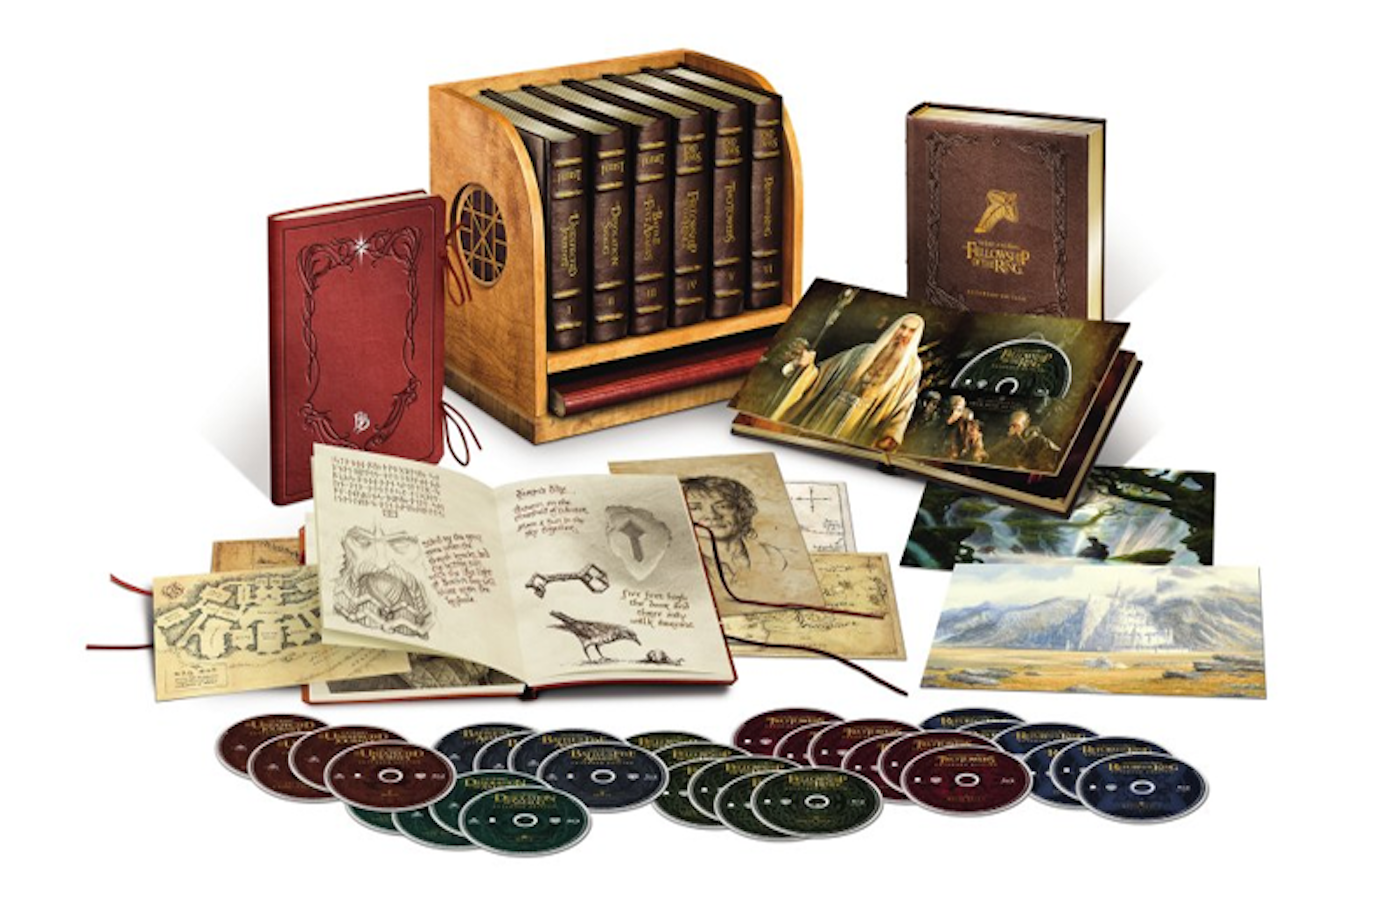 Lord of the rings hobbit box set